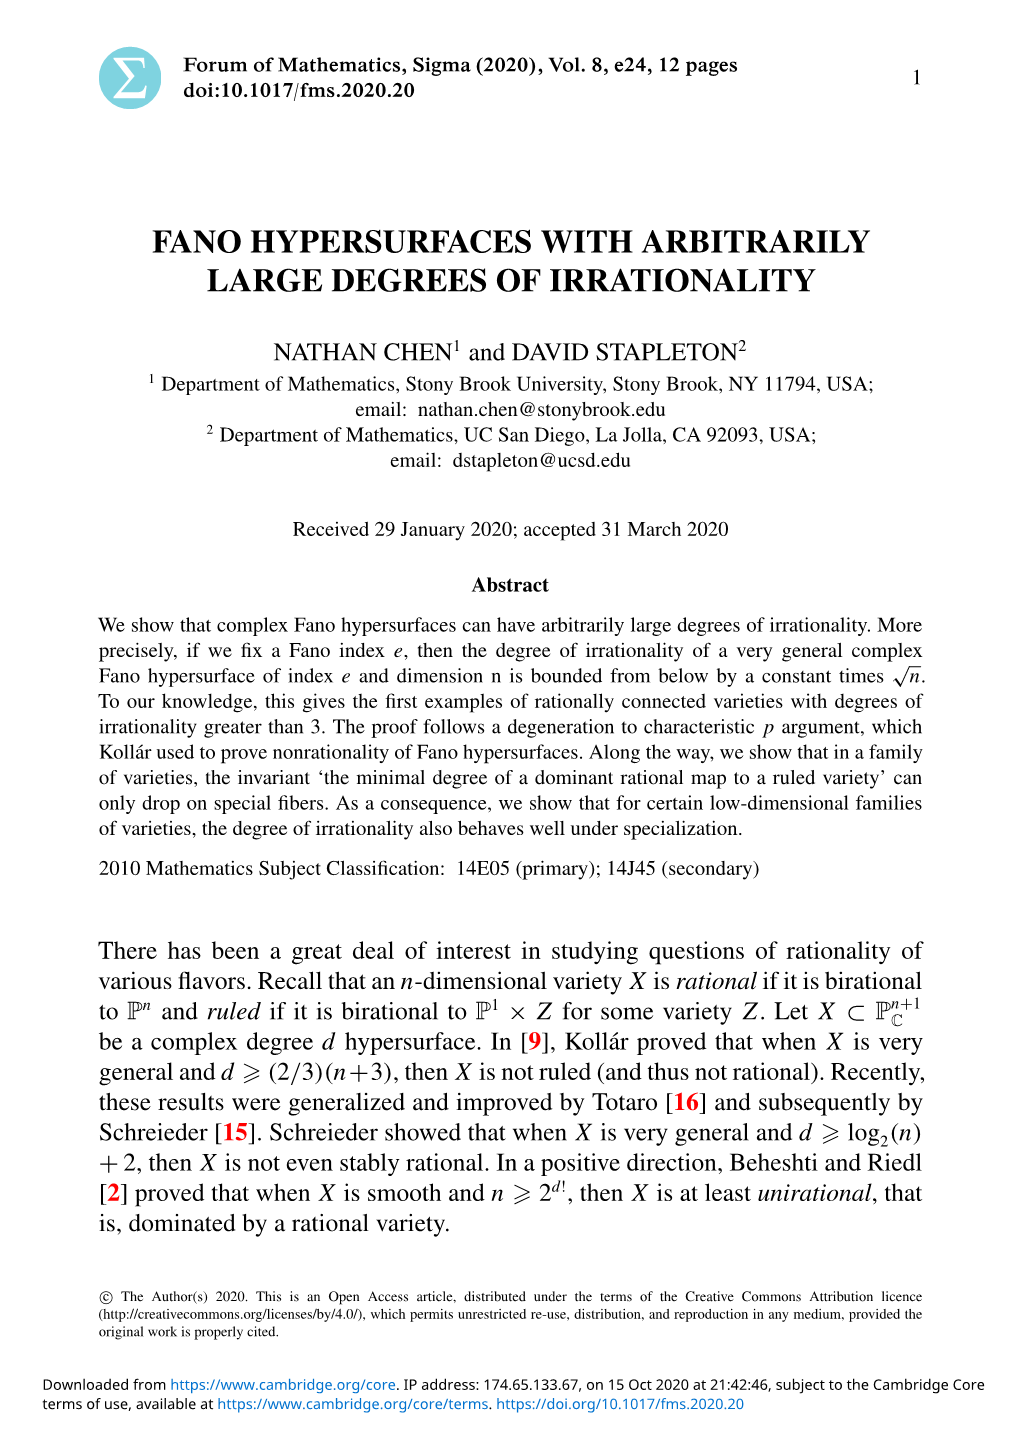 Fano Hypersurfaces with Arbitrarily Large Degrees of Irrationality